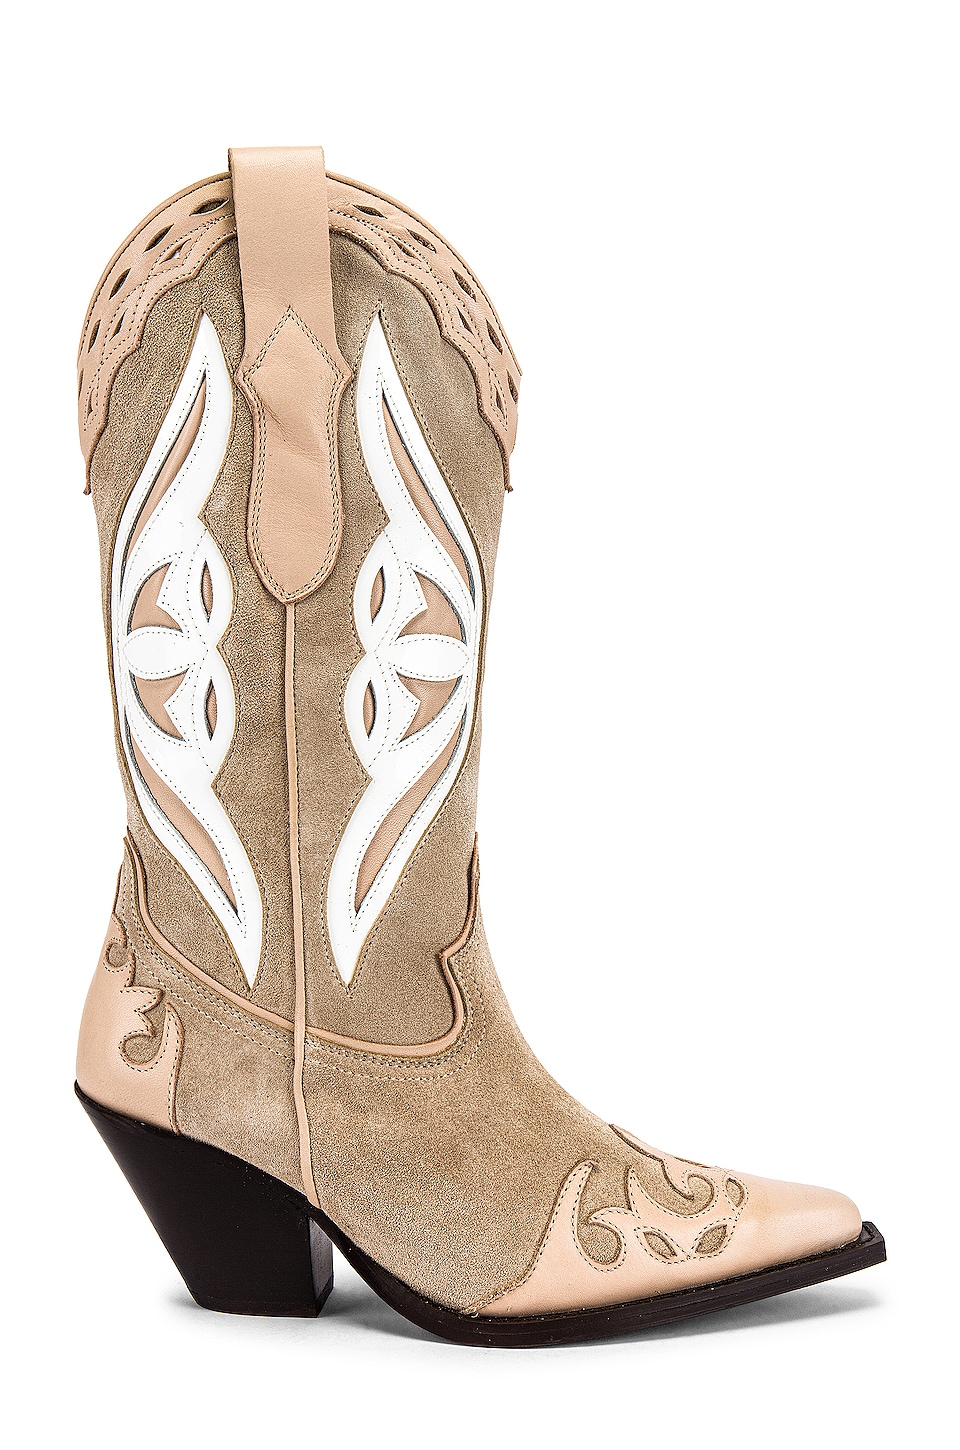 TORAL The Claire Boot in Beige